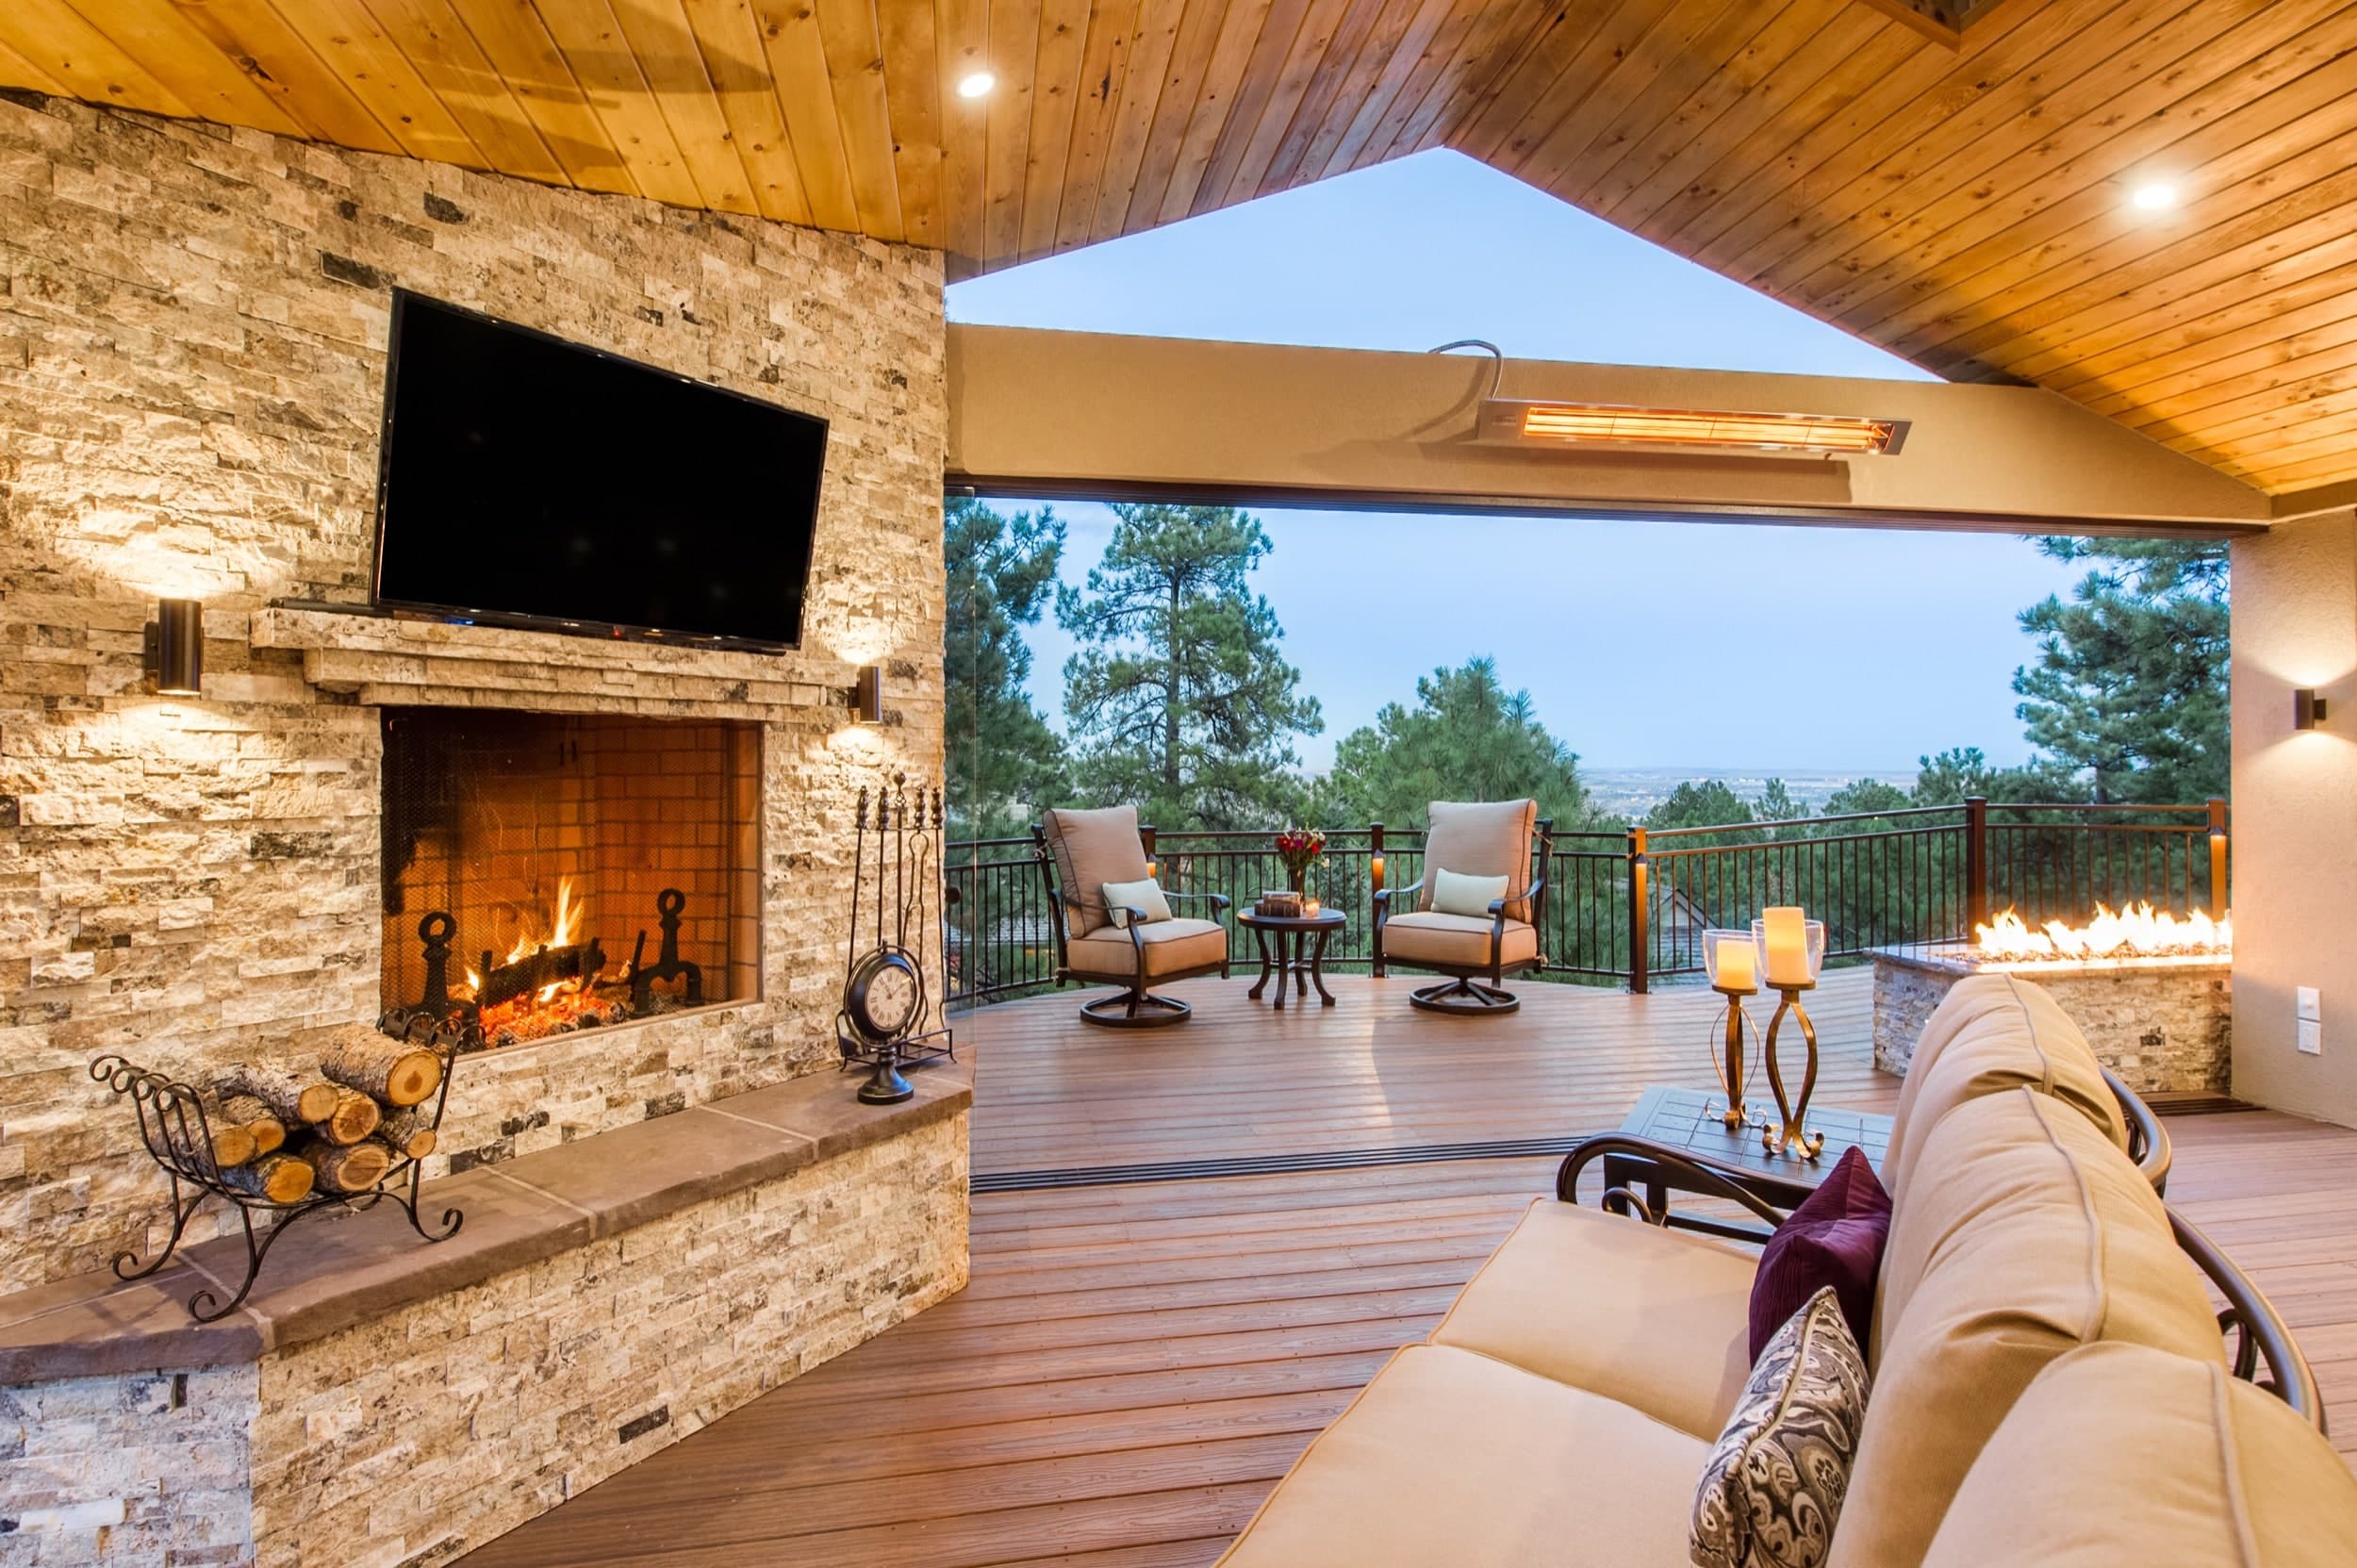 A deck with a fireplace and tv.